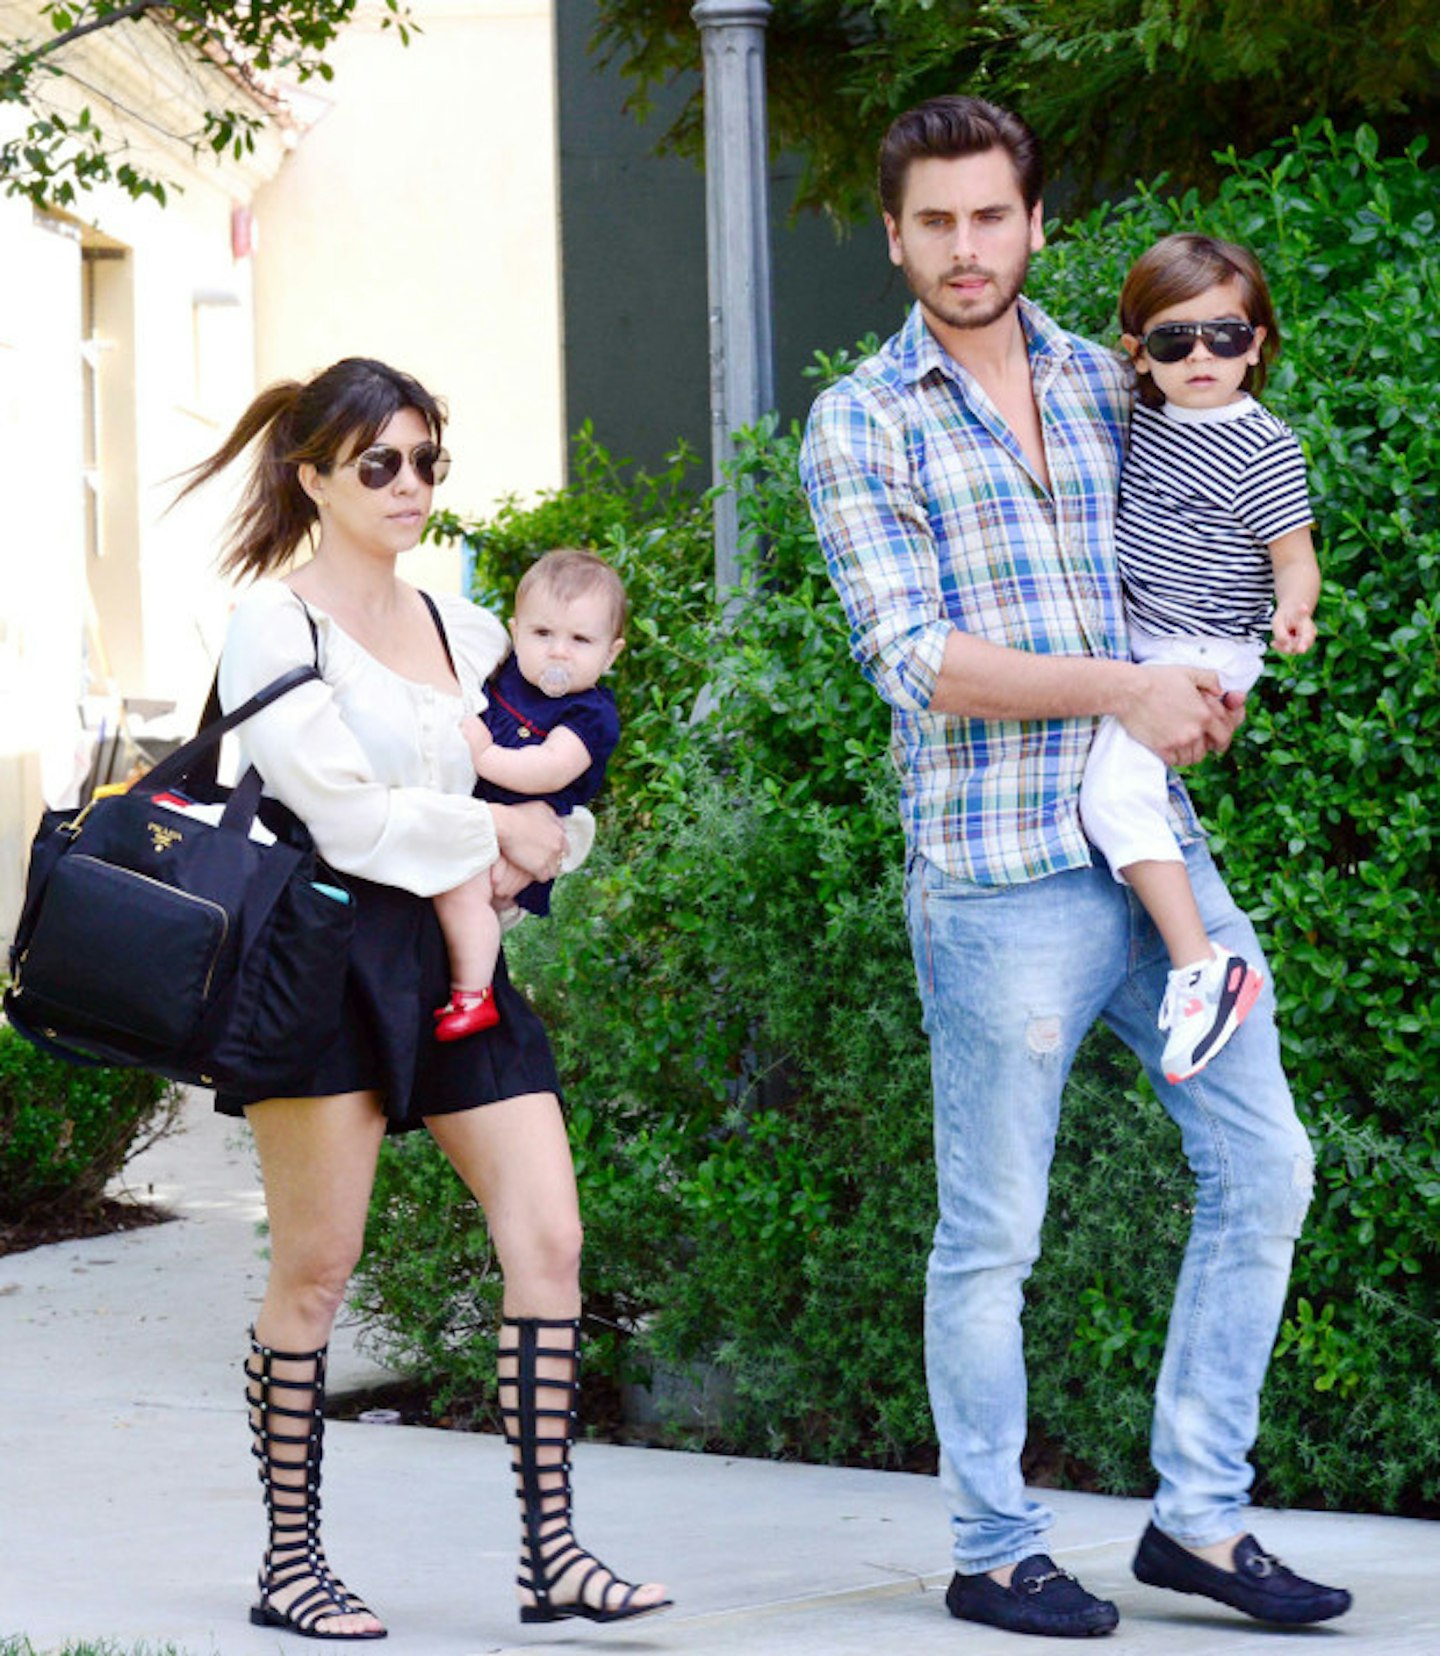 Kourtney and Scott with Penelope and Mason in 2013